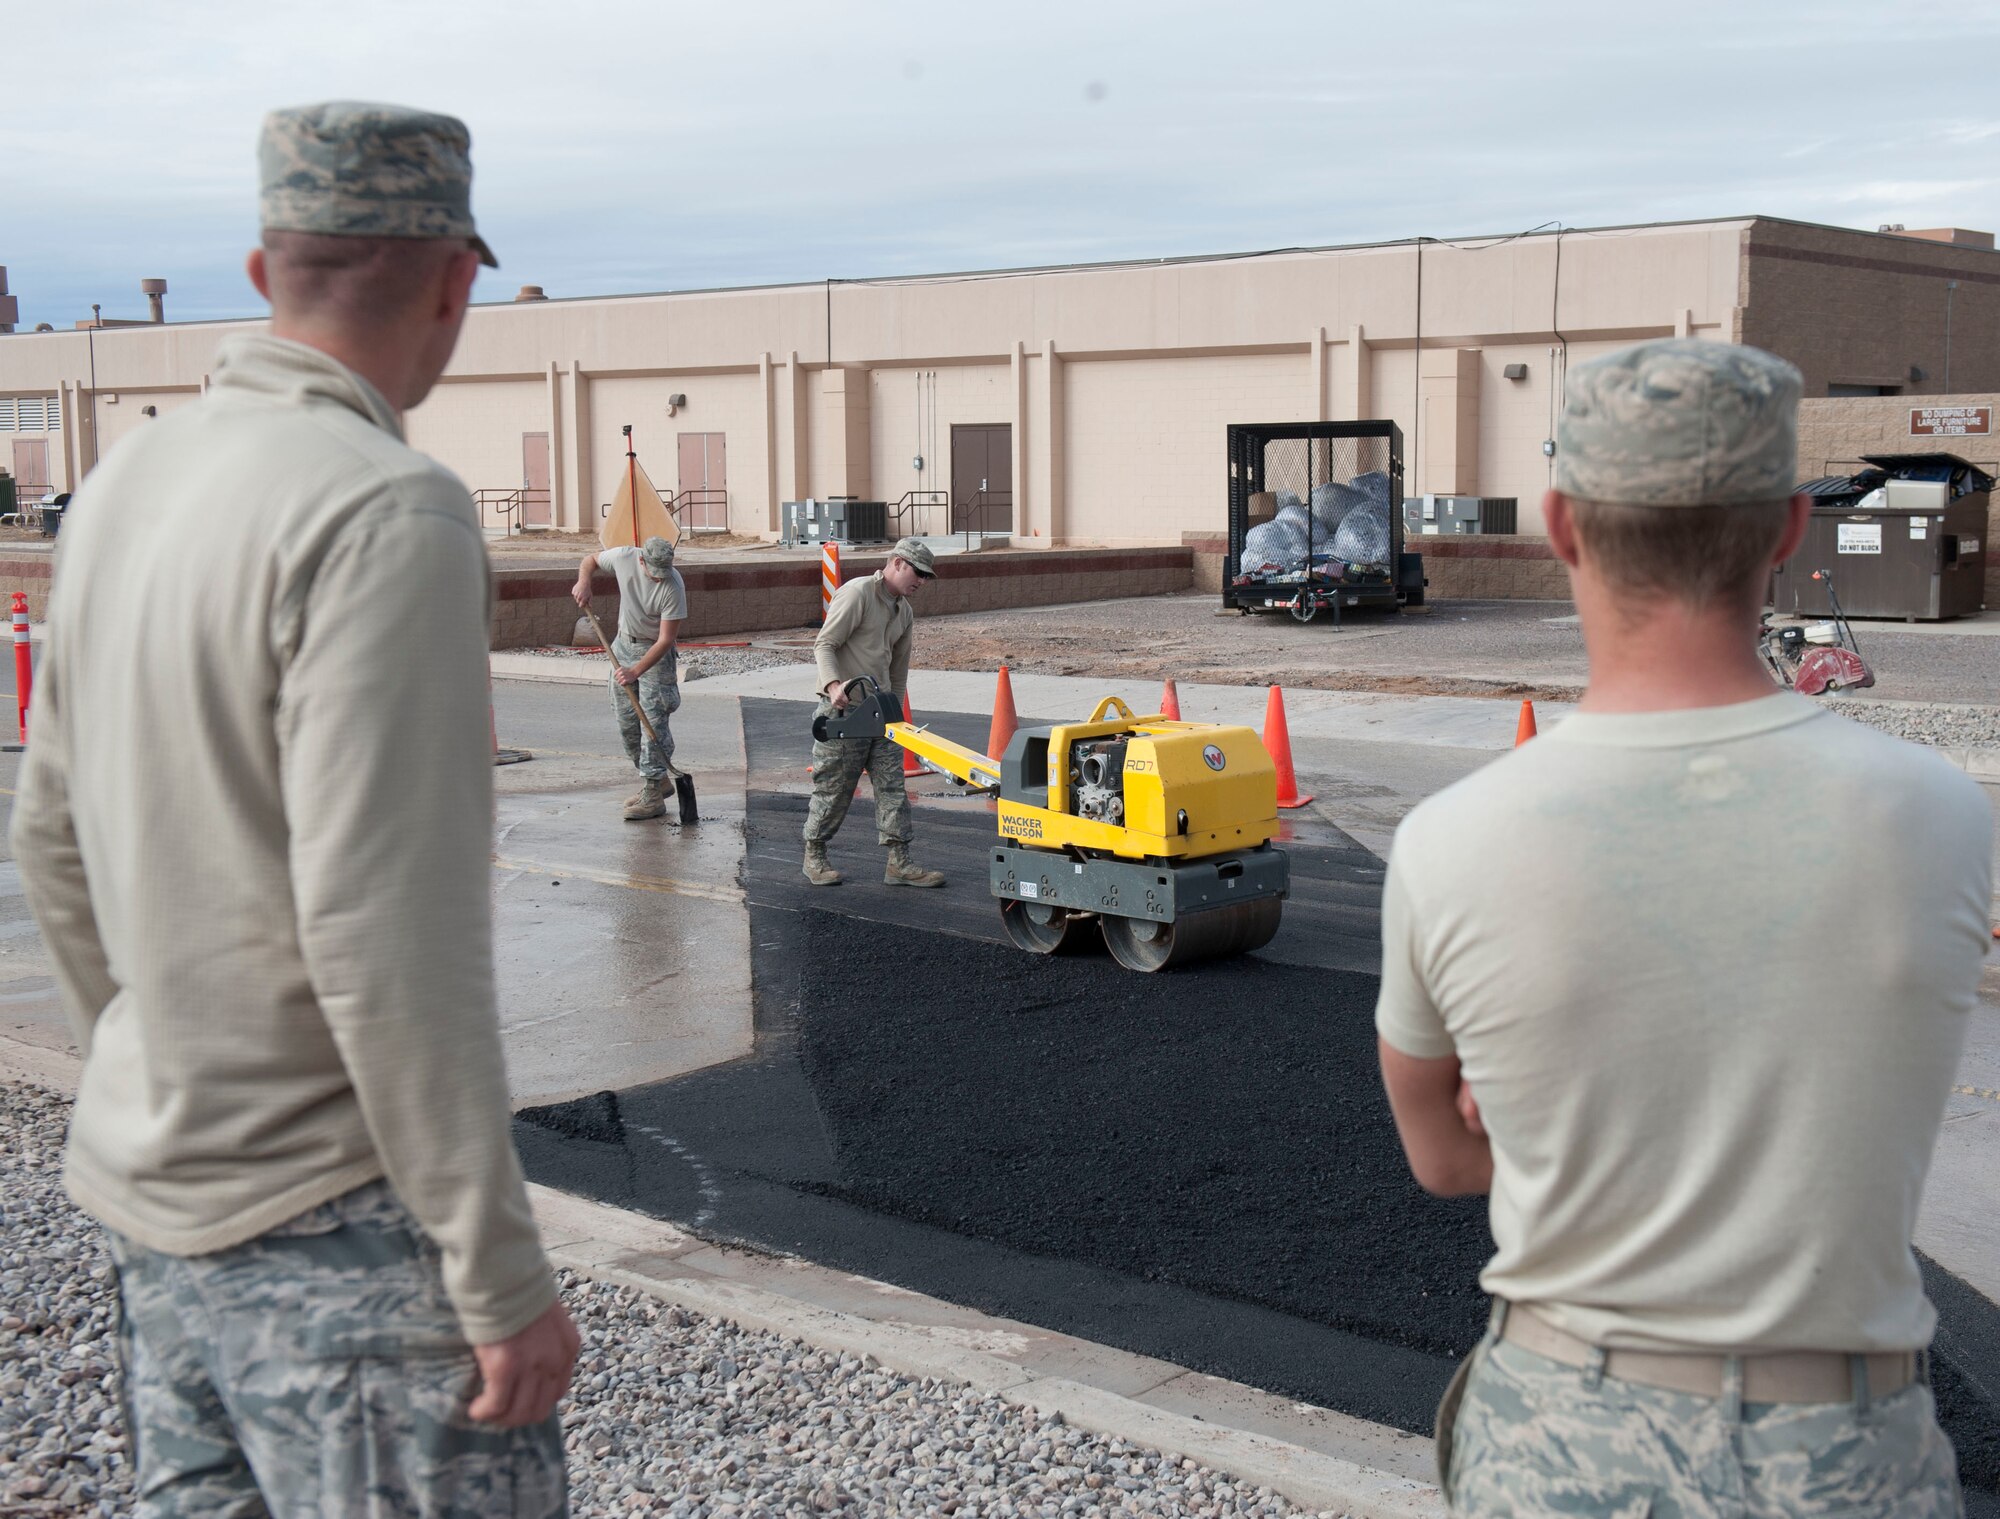 Senior Airman Alec Bacon and Senior Airman Jordan Lechner, Pavement and Equipment craftsmen, assigned to the 49th Civil Engineer Squadron, compact fresh asphalt with a heavy roller at Holloman Air Force Base, N.M., January 17, 2017. After the broken utility line was replaced, the CE team came in and backfilled the hole topping it off with fresh asphalt. A utility break occurred under the roadway causing for the 49th CES to quickly respond and fix the problem. (U.S. Air Force photo by Airman Ilyana A. Escalona)